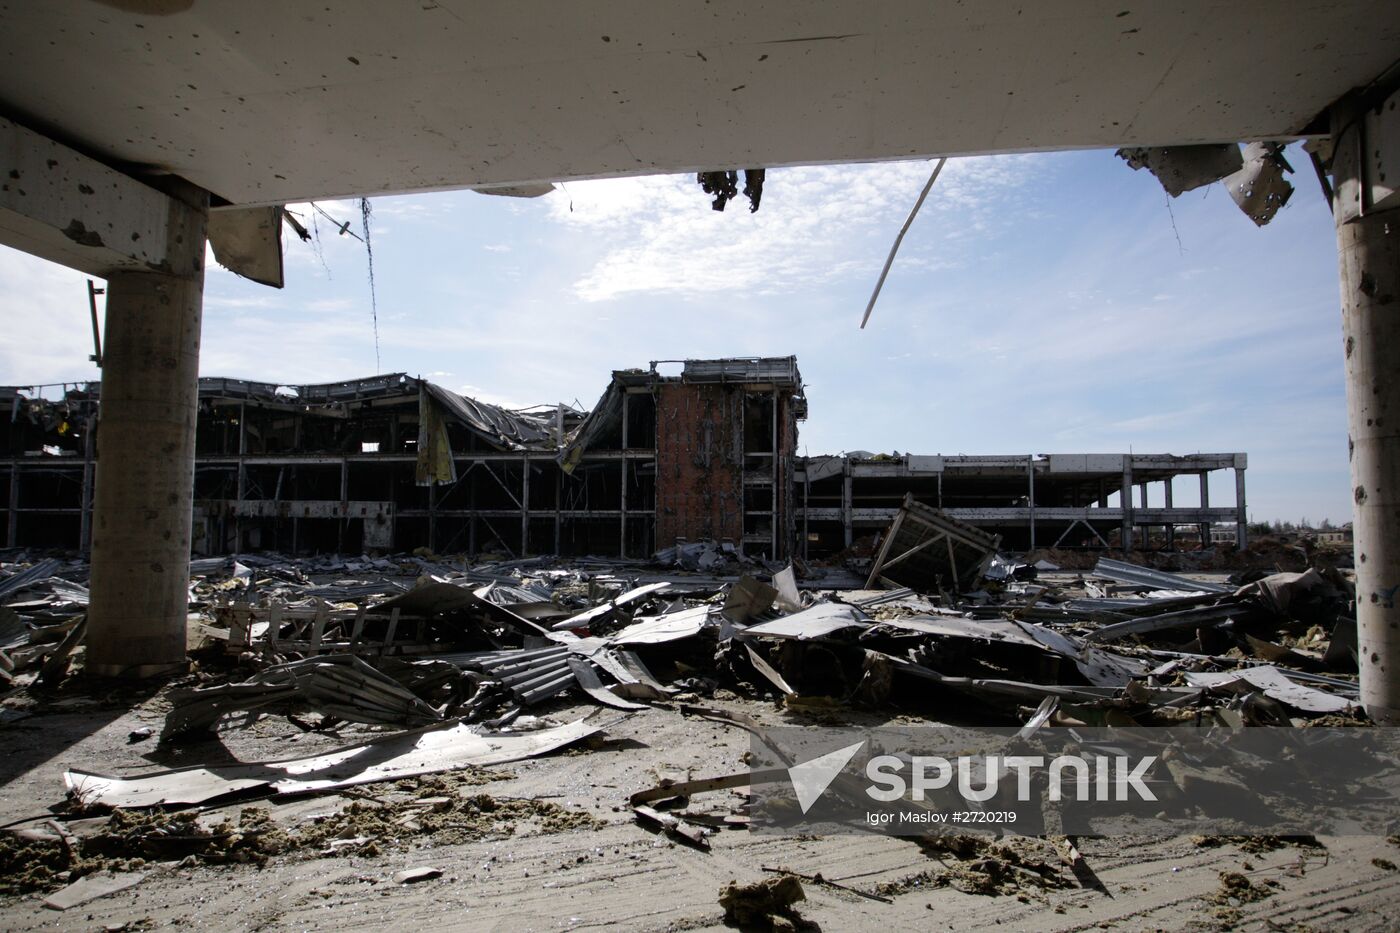 Search for victims of Donetsk airport tragedy resumed